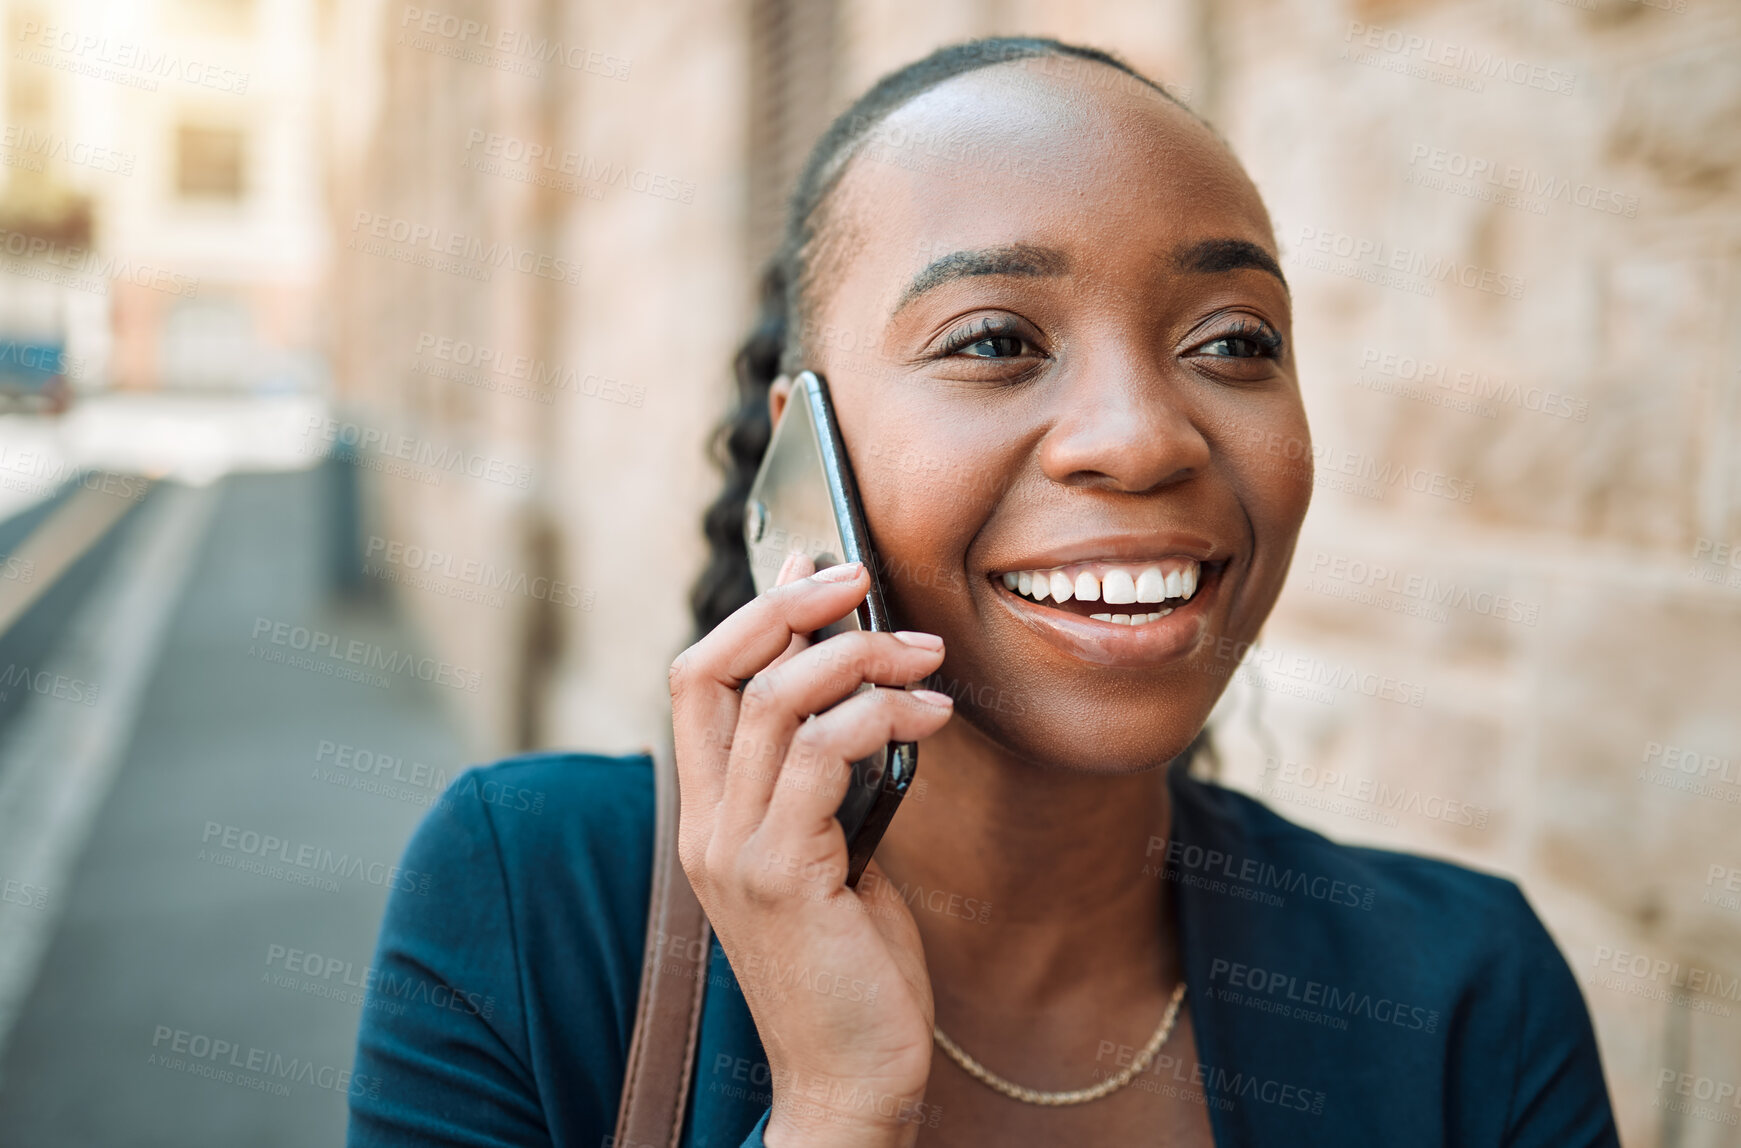 Buy stock photo Happy black woman, phone call and walking in city for conversation or communication outdoors. African female person smile for business discussion, networking or travel on smartphone in an urban town